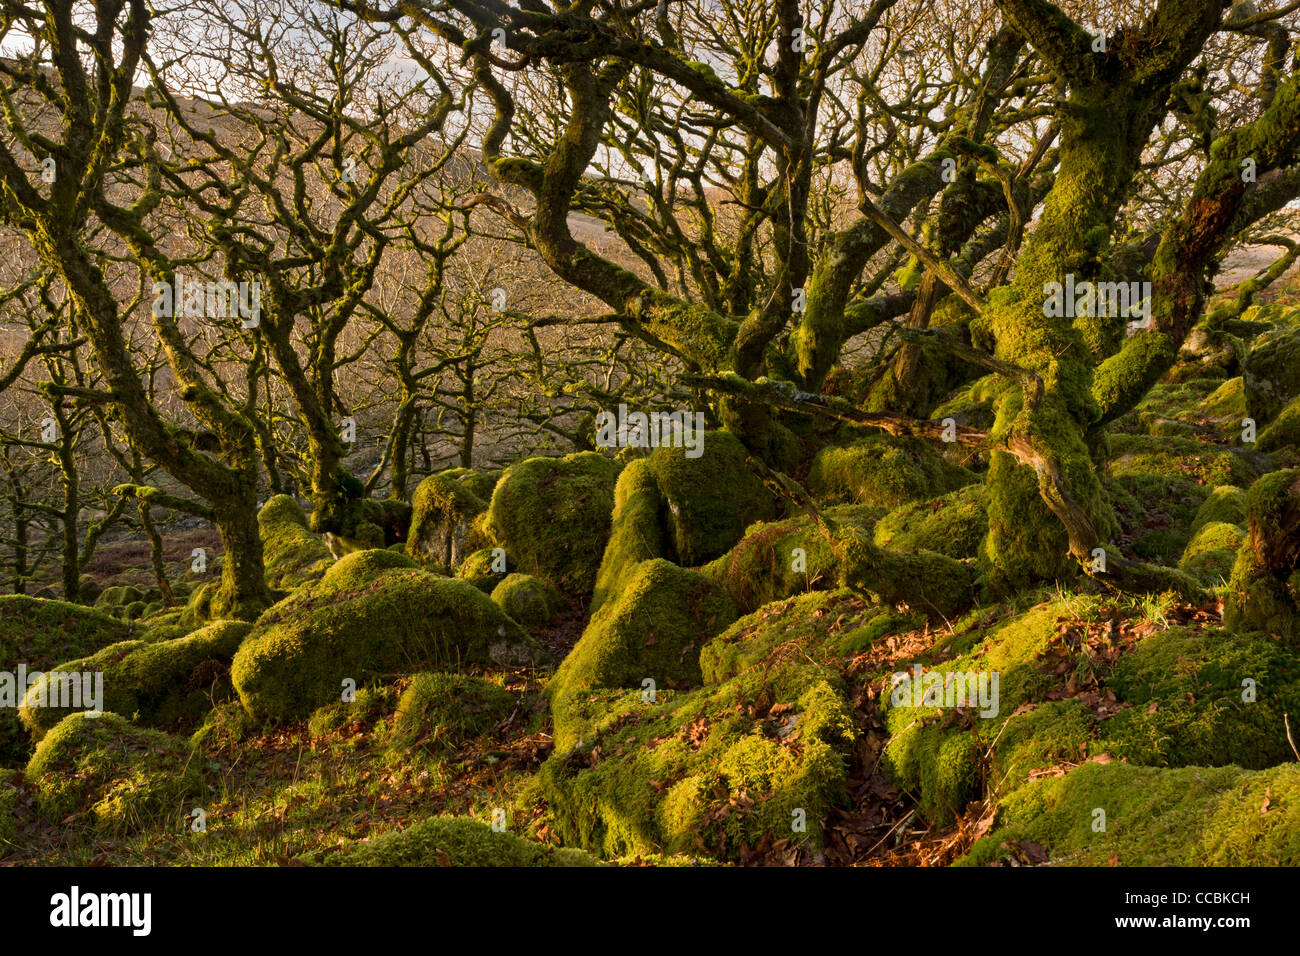 Wistman's Wood NNR - high altitude Common Oak woodland in winter on Dartmoor, Devon. England's equivalent of cloud forest. Stock Photo